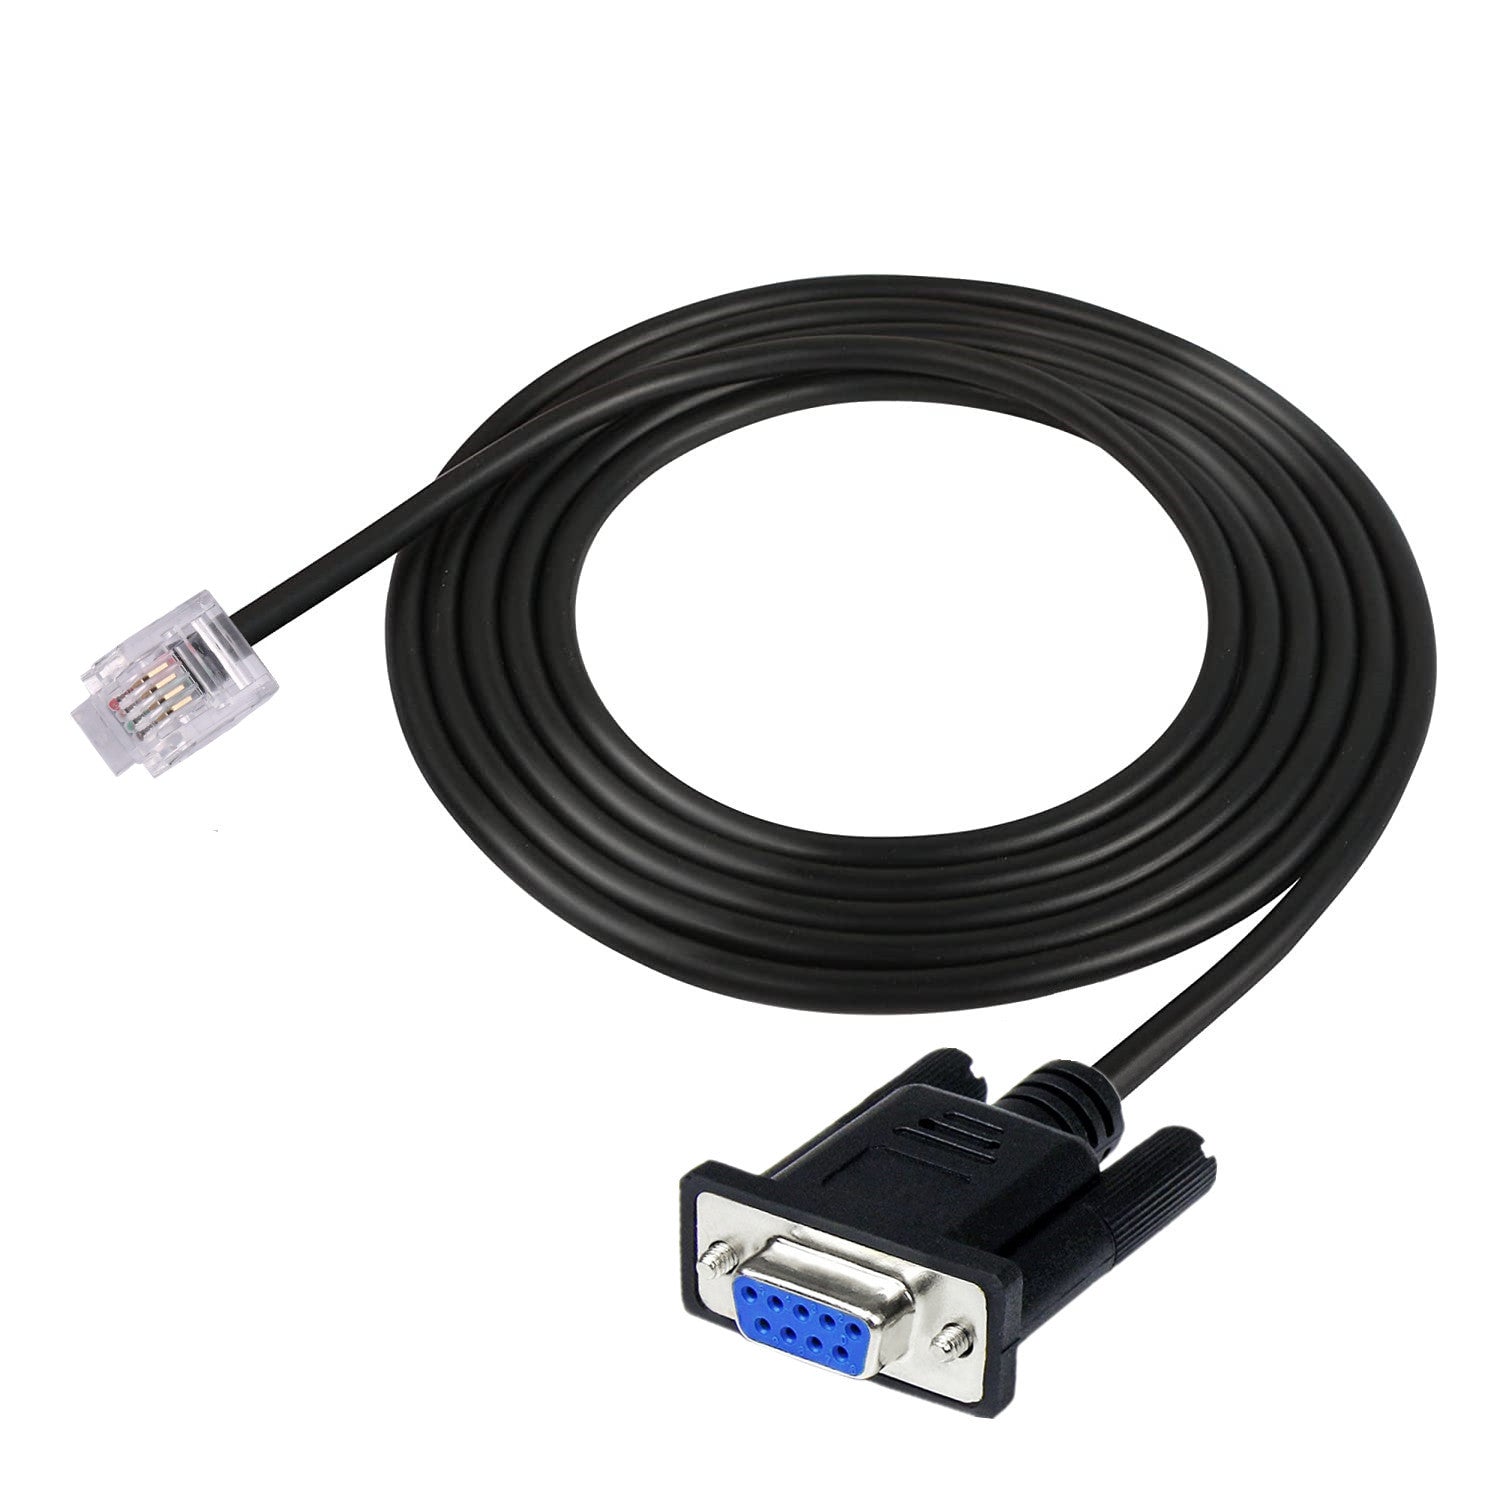 DB9 RS232 to RJ11 6P4C Serial Console Cable for APC AP7800 AP7900 RS232 940-0144A